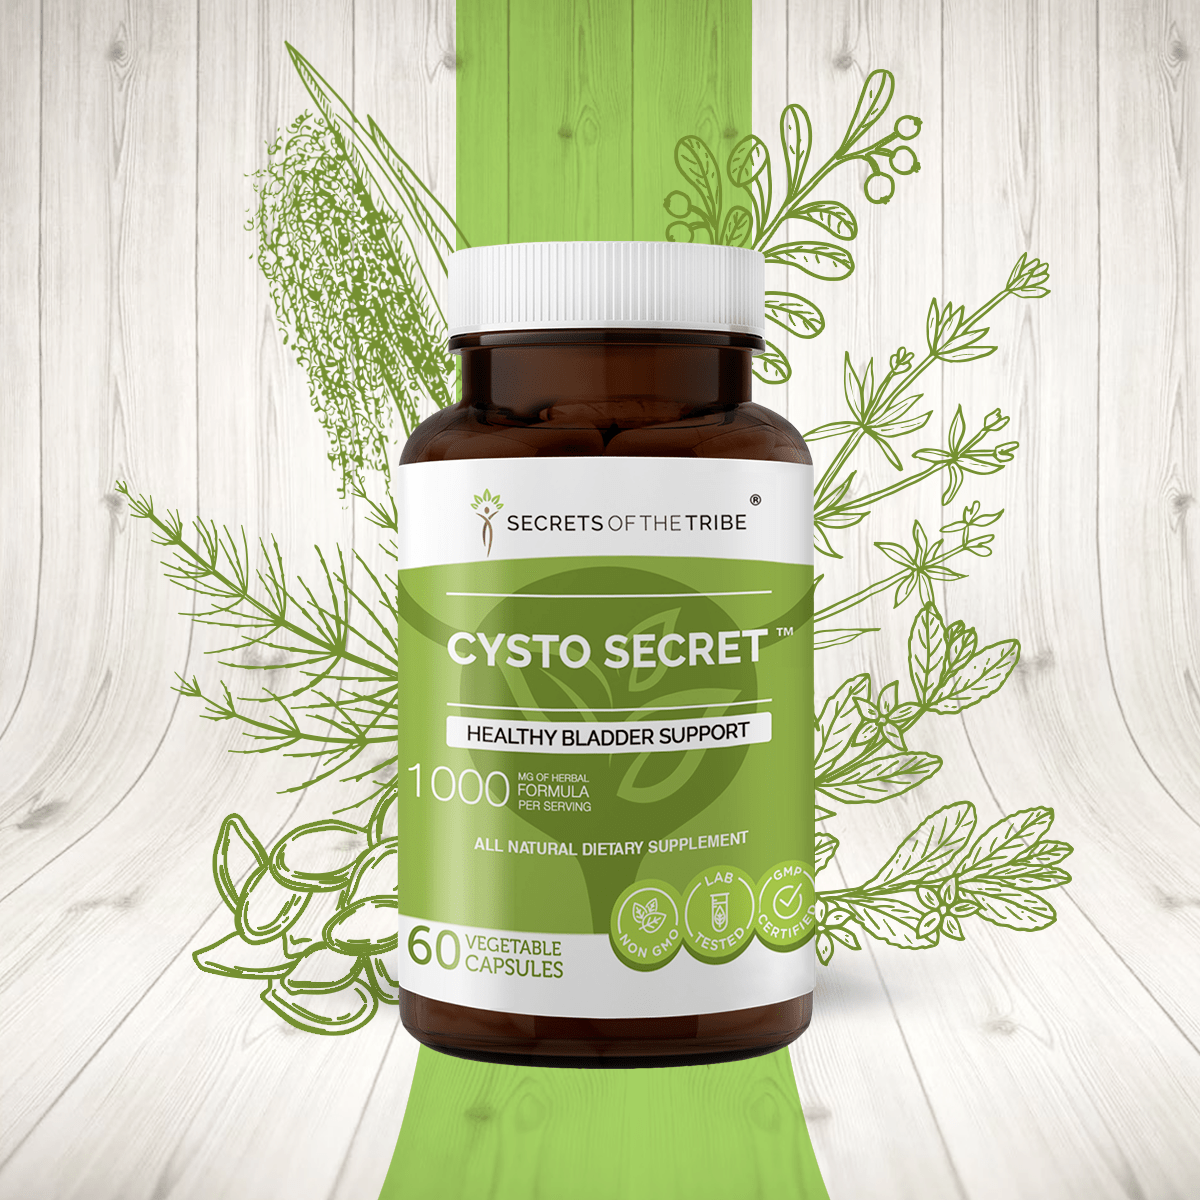 Cysto Secret Capsules. Healthy Bladder Support